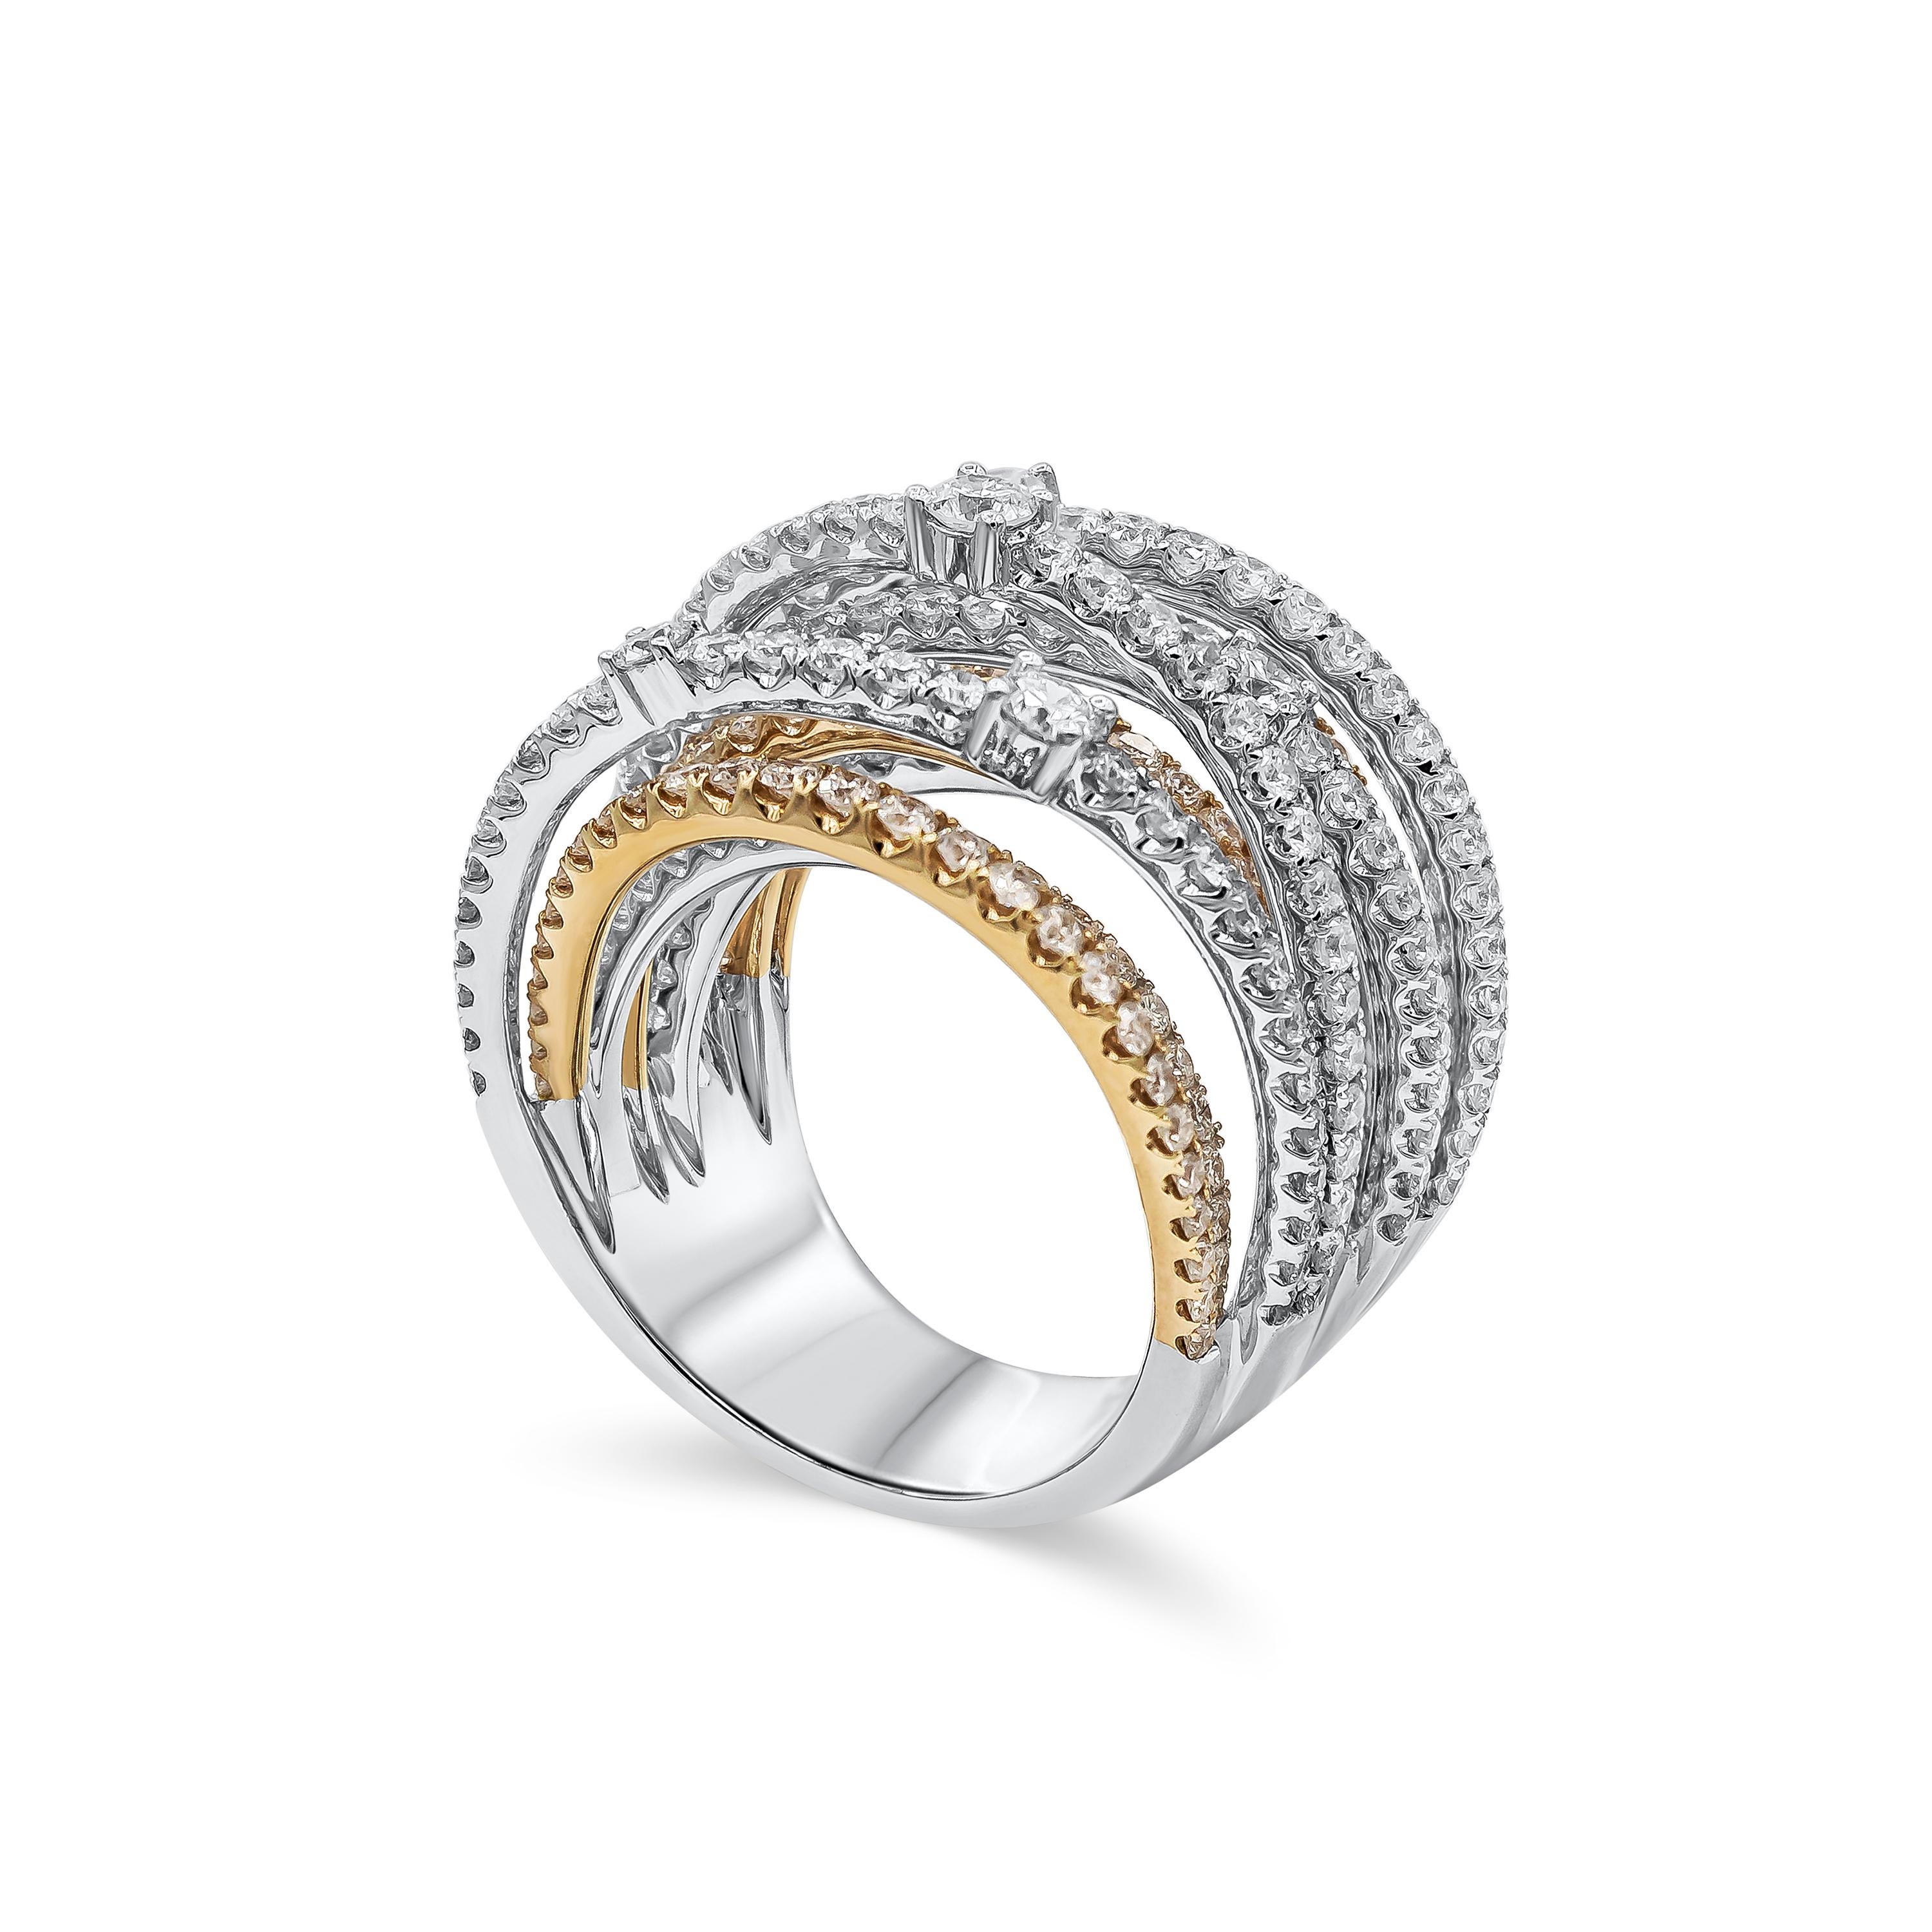 Showcasing multiple rows of round brilliant diamonds that elegantly intertwine with each other. Diamonds weigh 3.52 carats total. Made in 18k white and rose gold. Size 6.5 US.

Style available in different price ranges. Prices are based on your